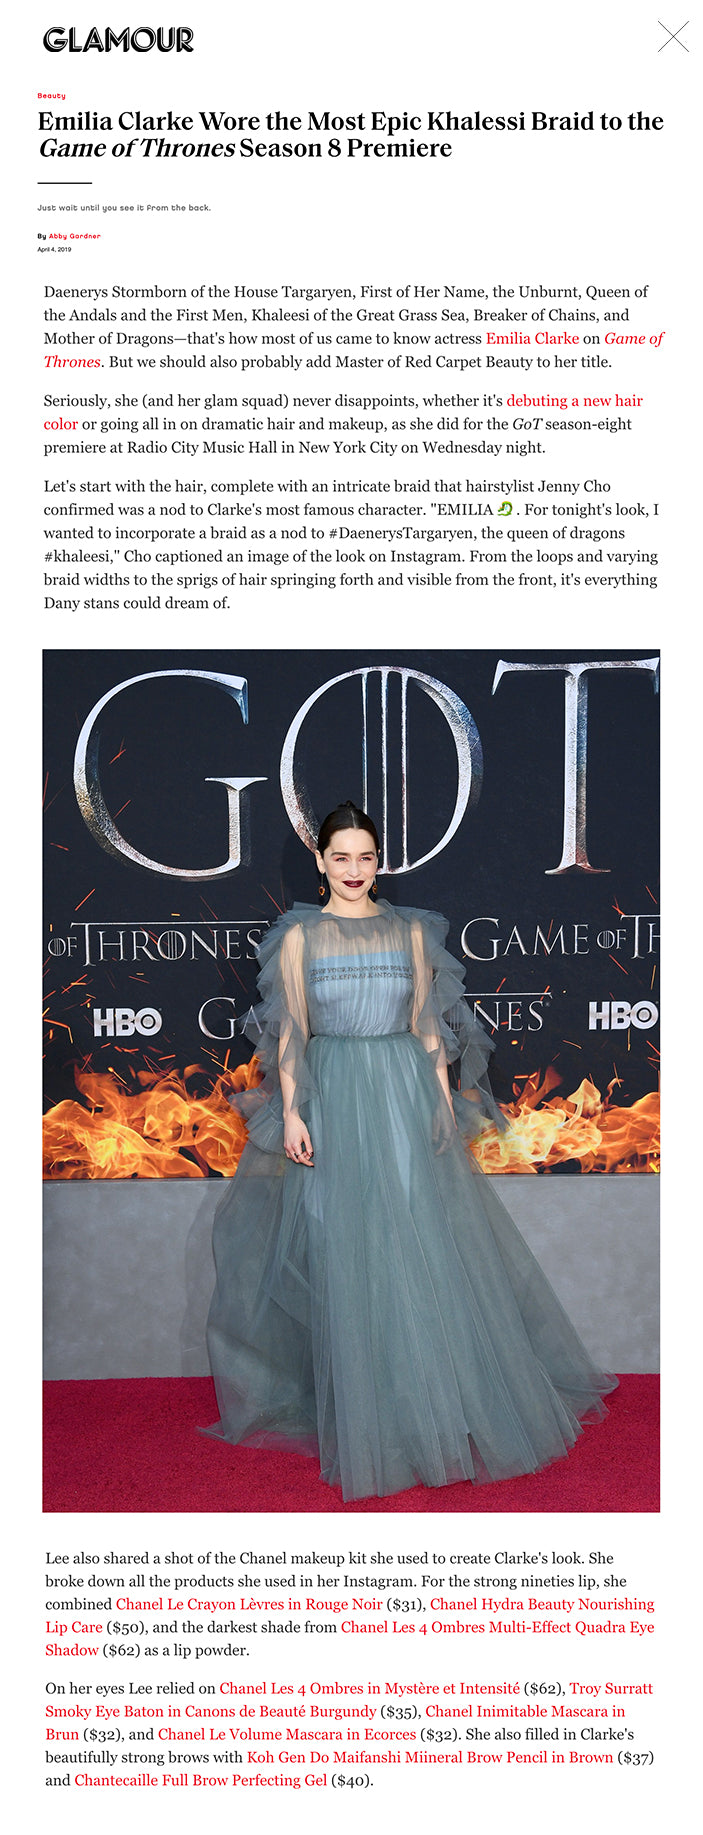 Emilia Clarke Wore the Most Epic Khalessi Braid to the Game of